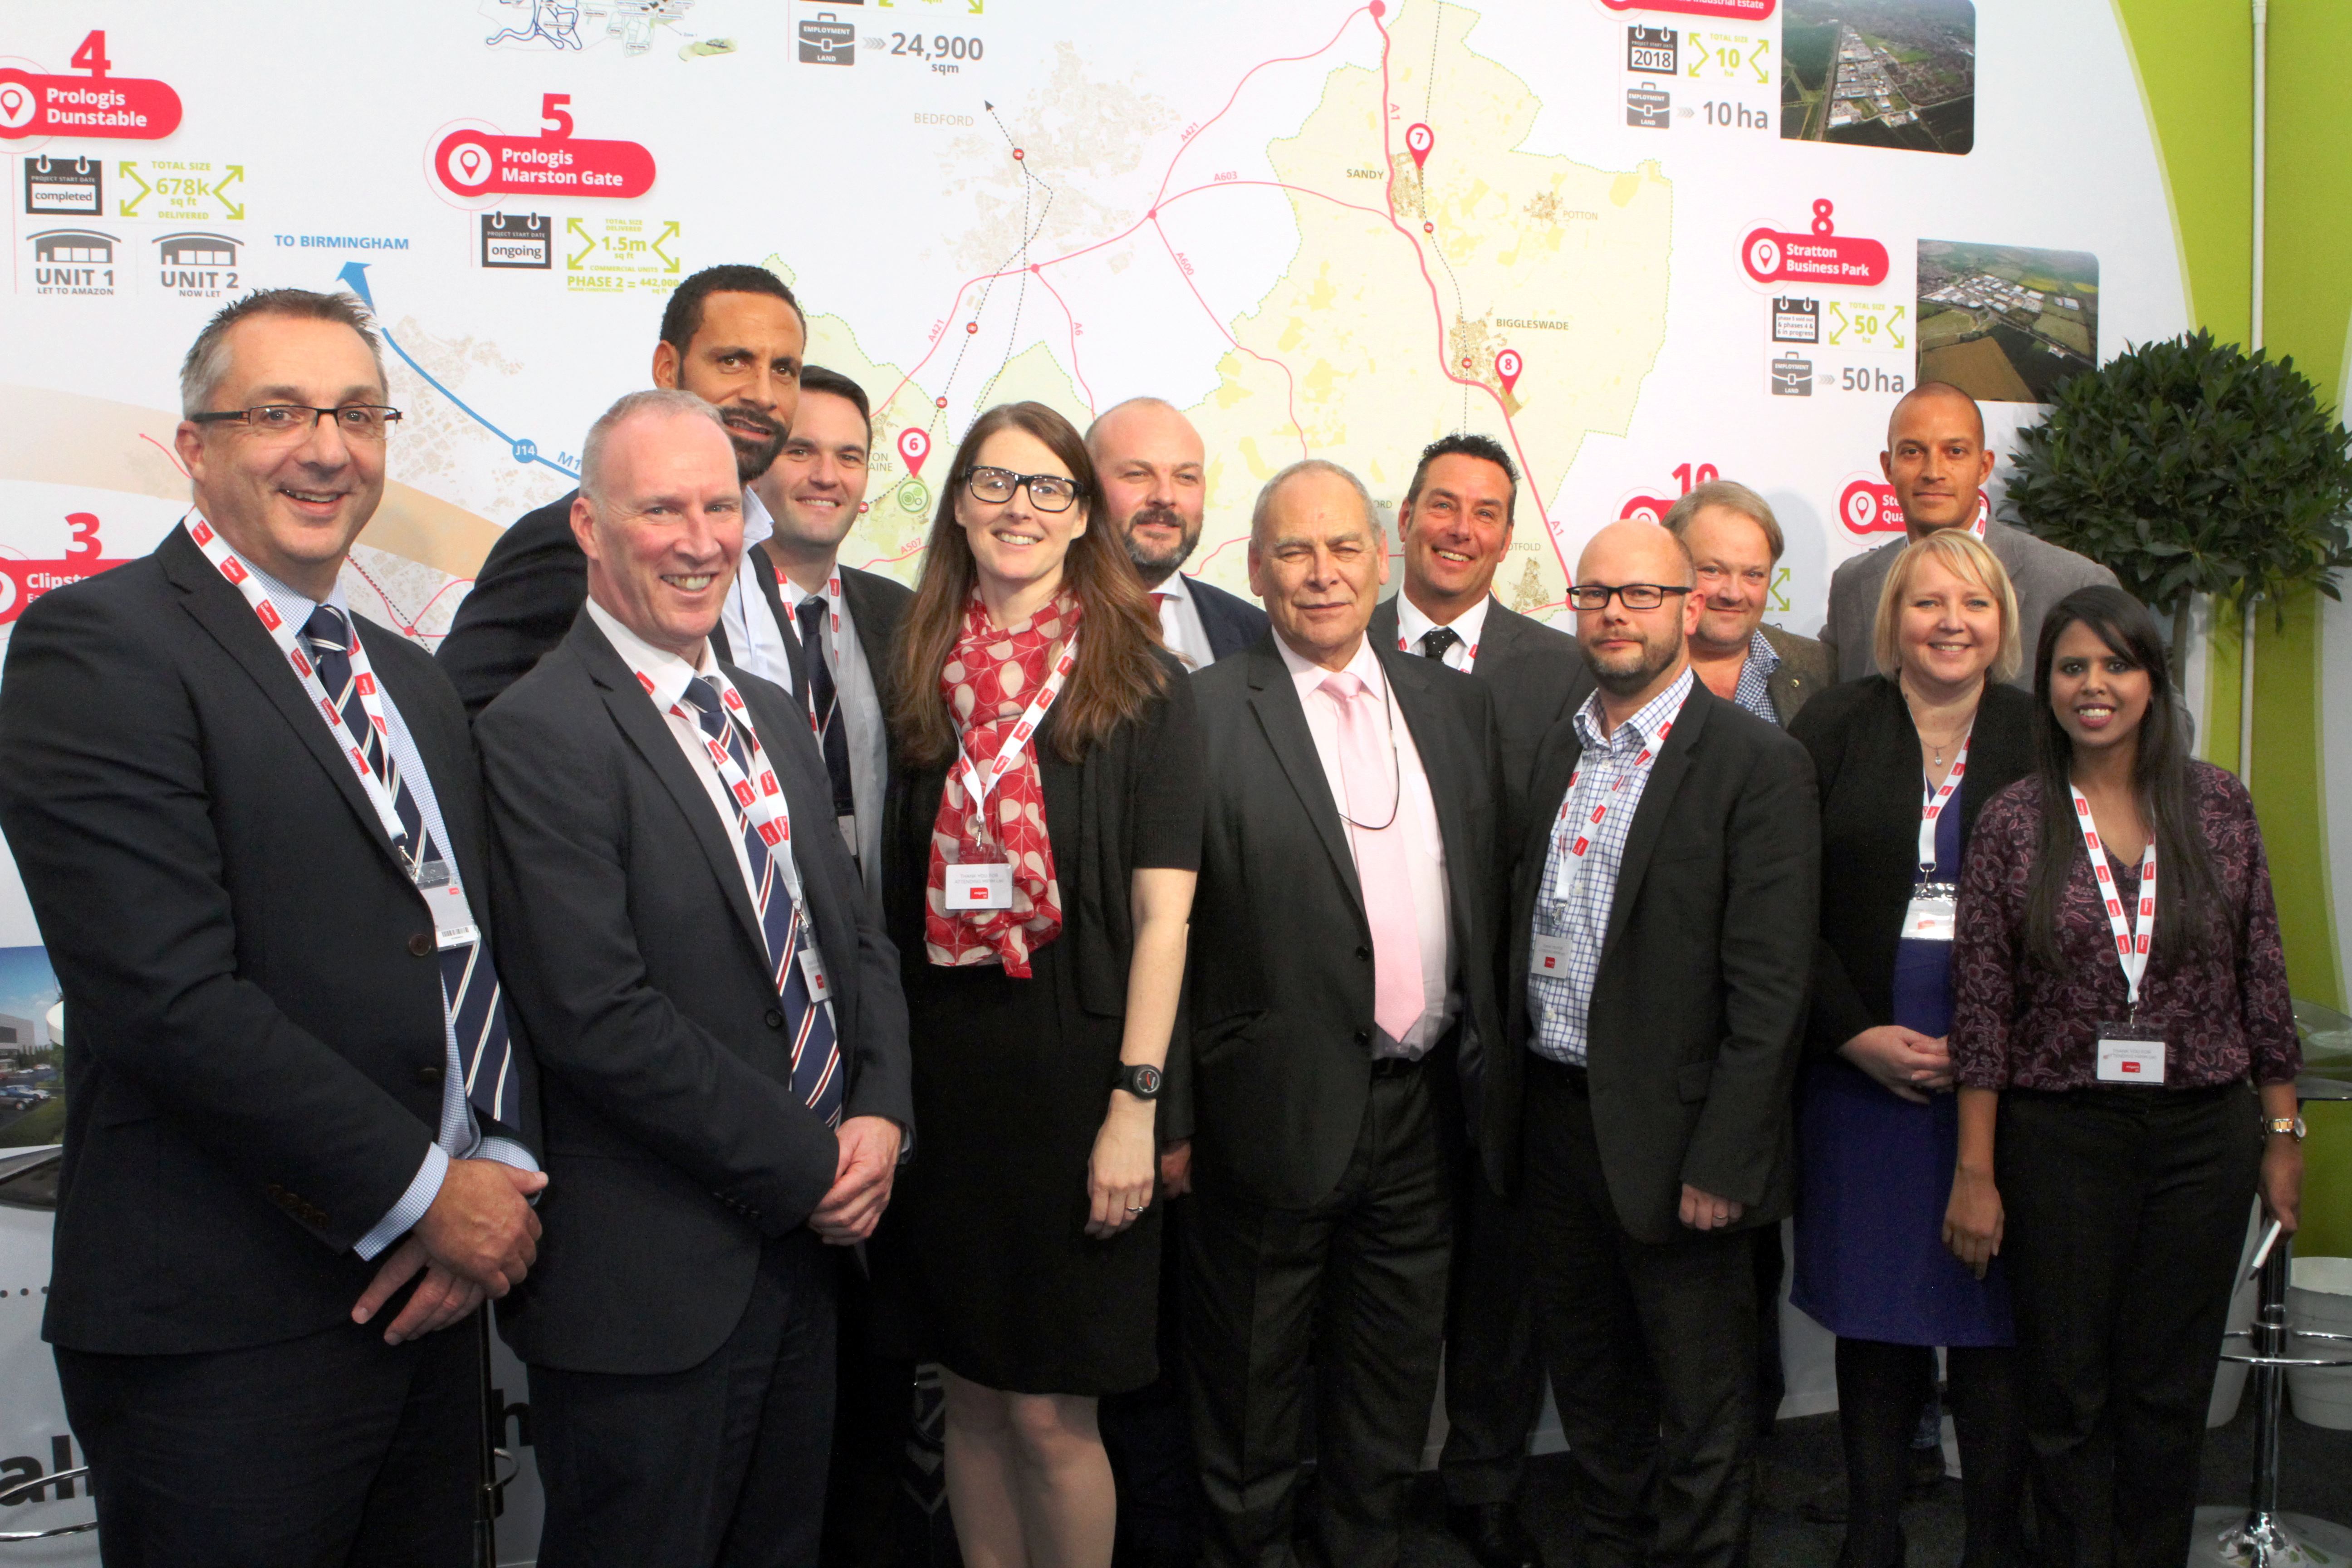  Be Central Bedfordshire makes its mark yet again at MIPIM this year!